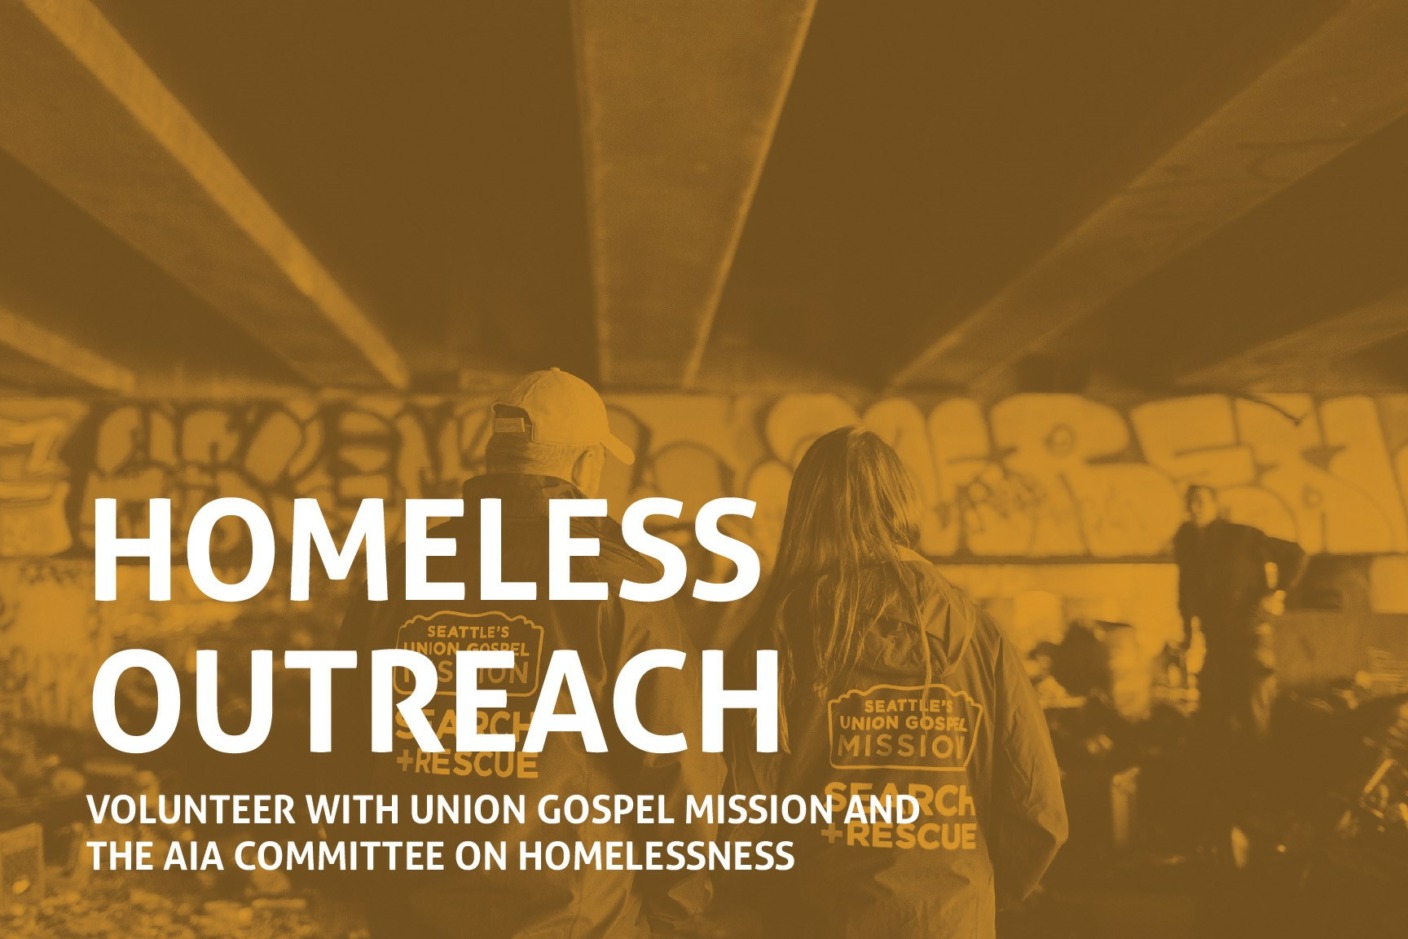 Join members of AIA Seattle's Committee on Homelessness as we volunteer with Union Gospel Mission's Search & Rescue team.